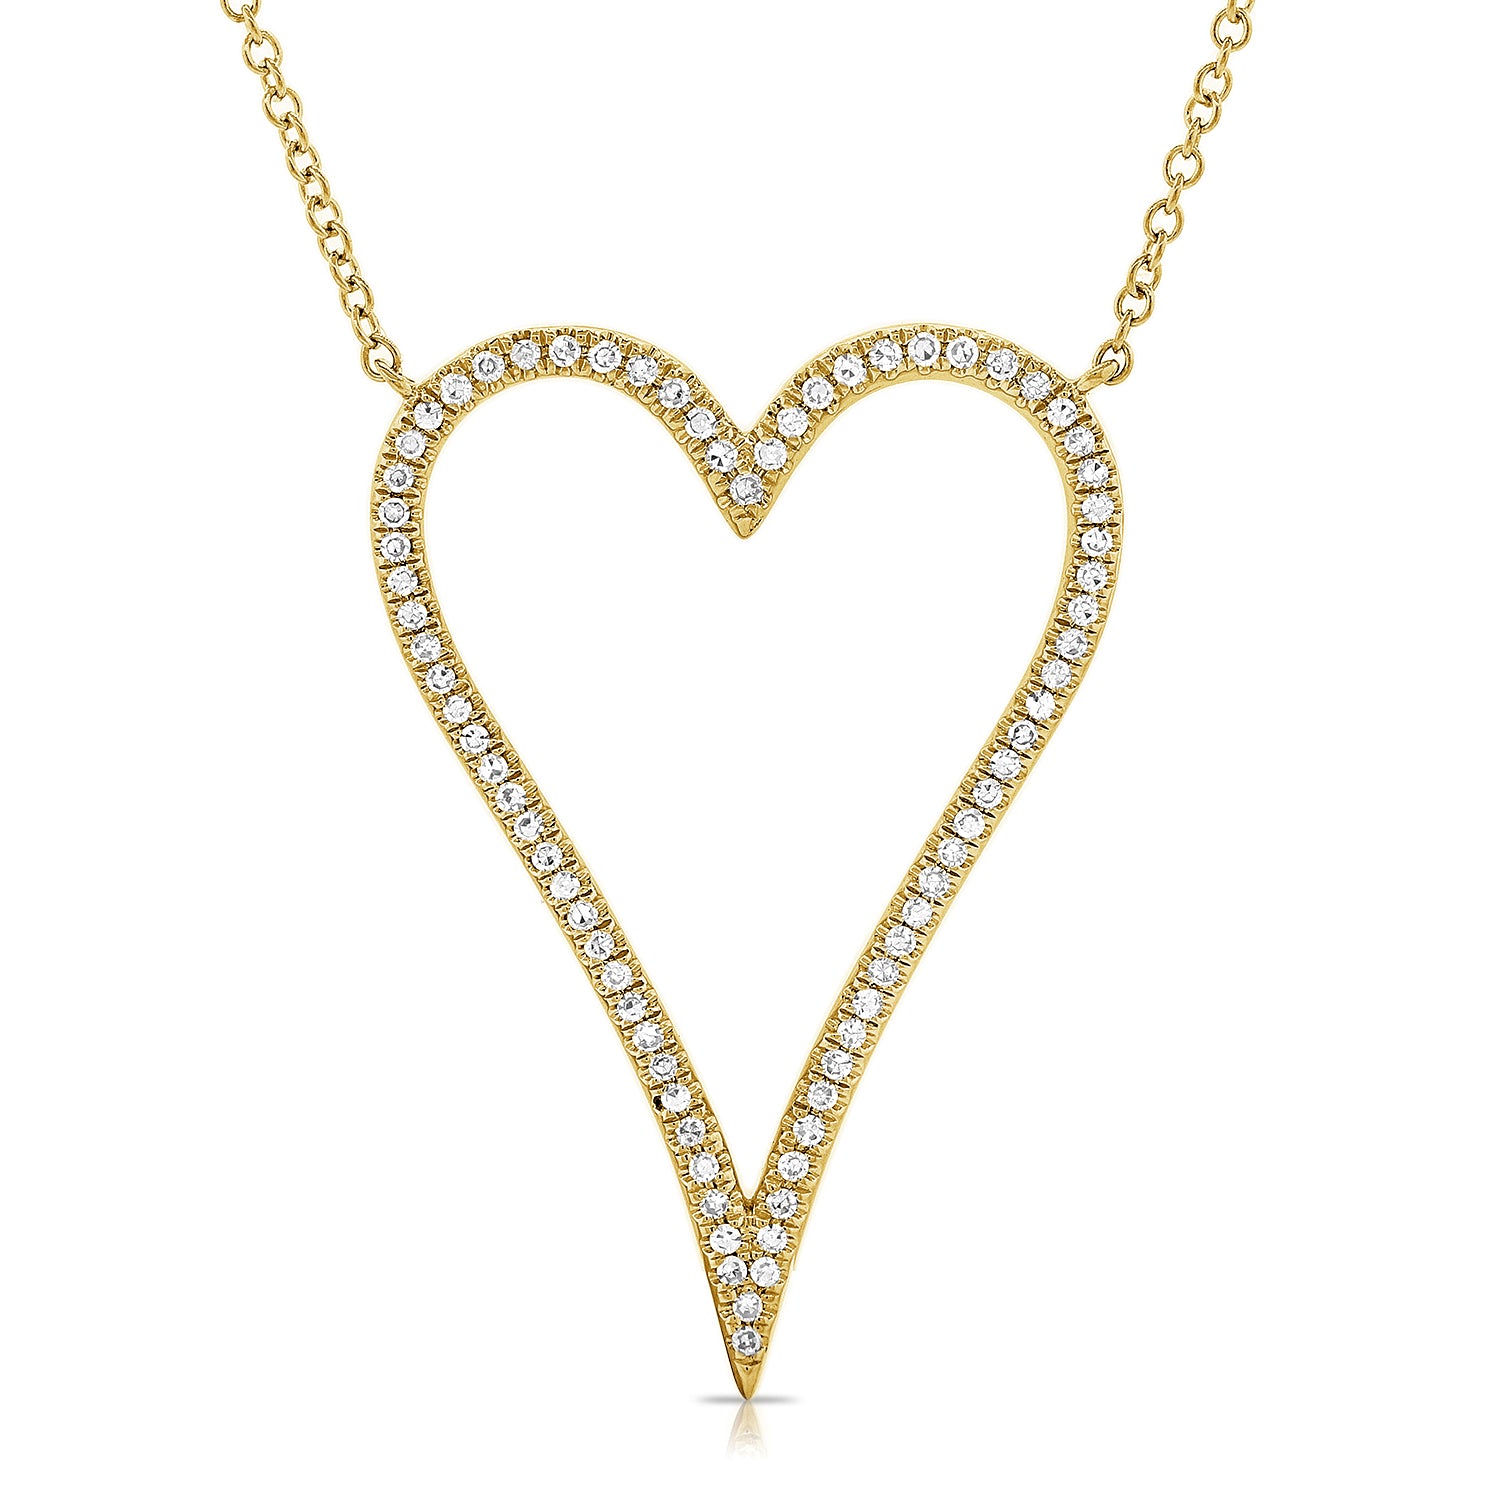 Jumbo Pave Outline Elongated Heart Necklace